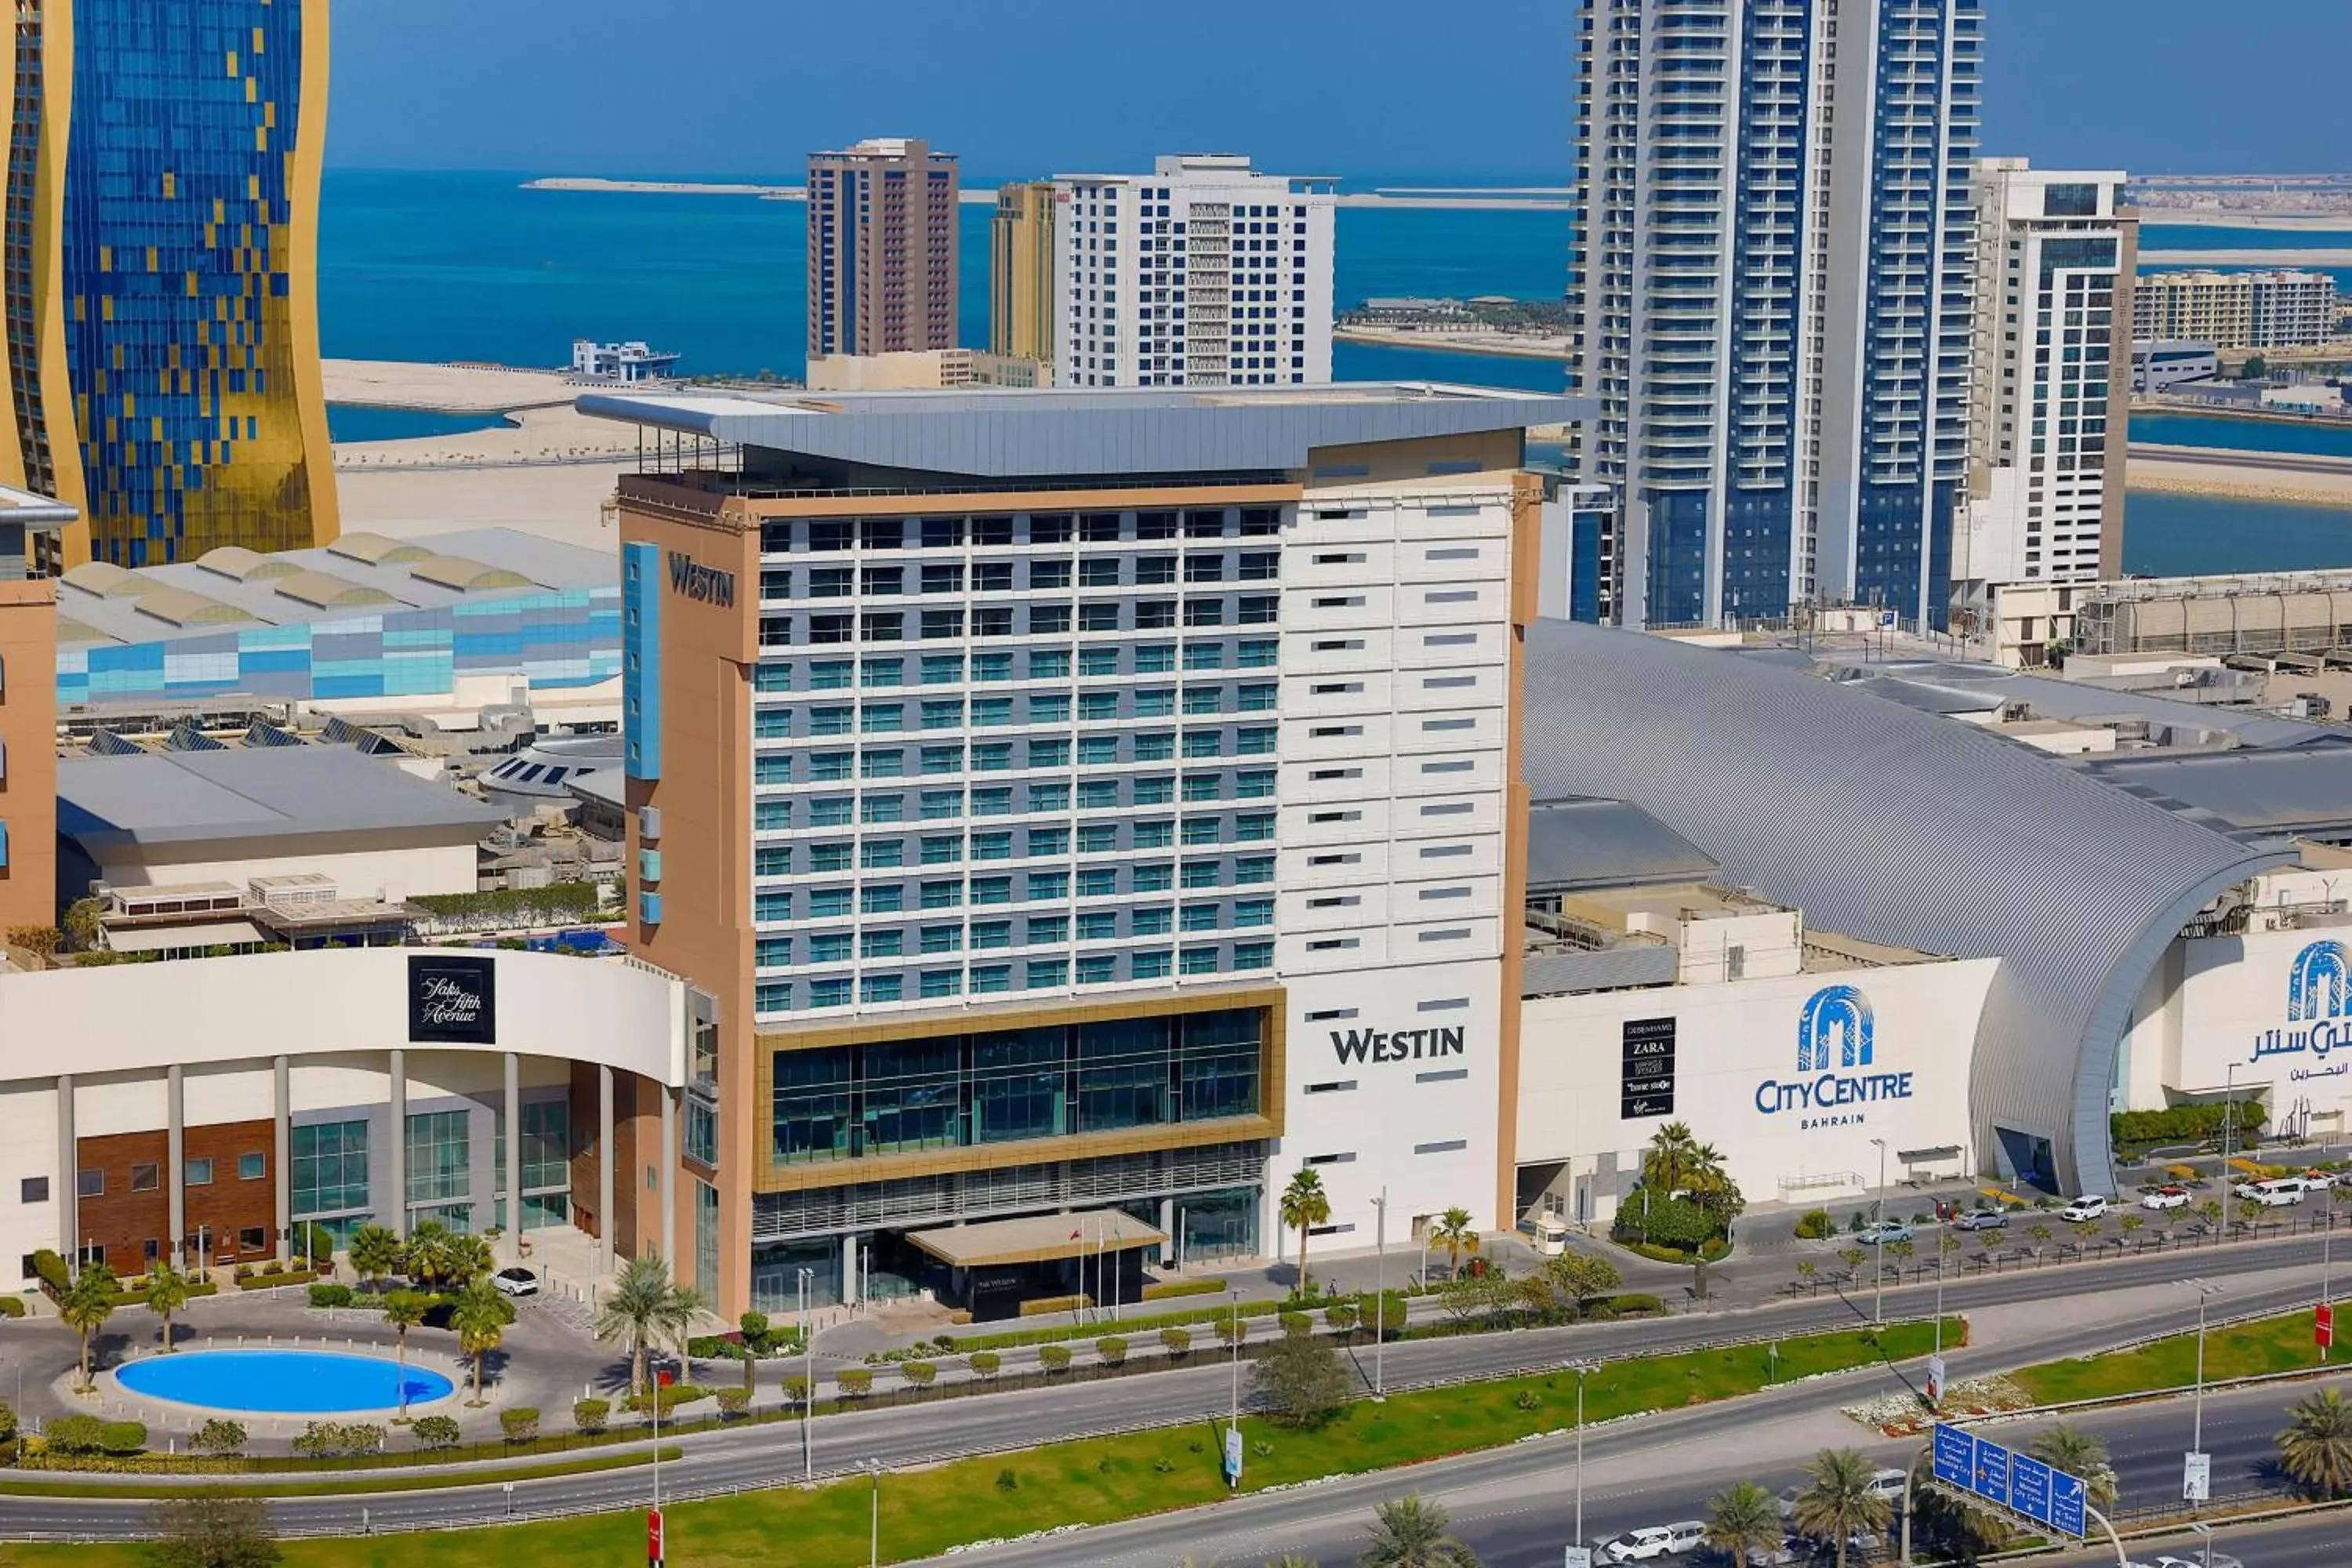 Property building, Bird's-eye View in The Westin City Centre Bahrain